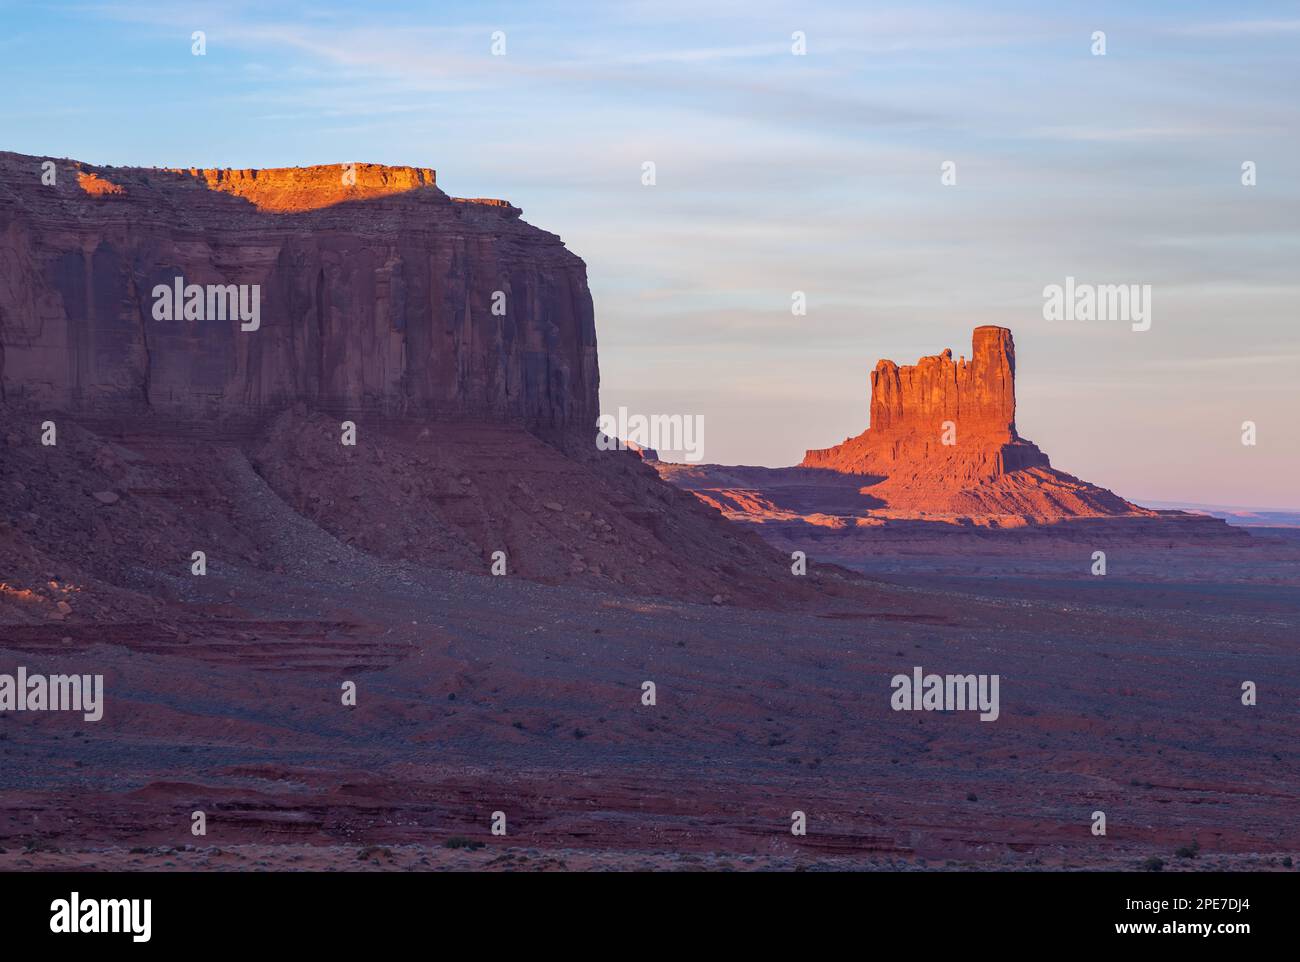 A picture of the Monument Valley landscape at sunset, with the Big Indian Butte rock formation on the right. Stock Photo